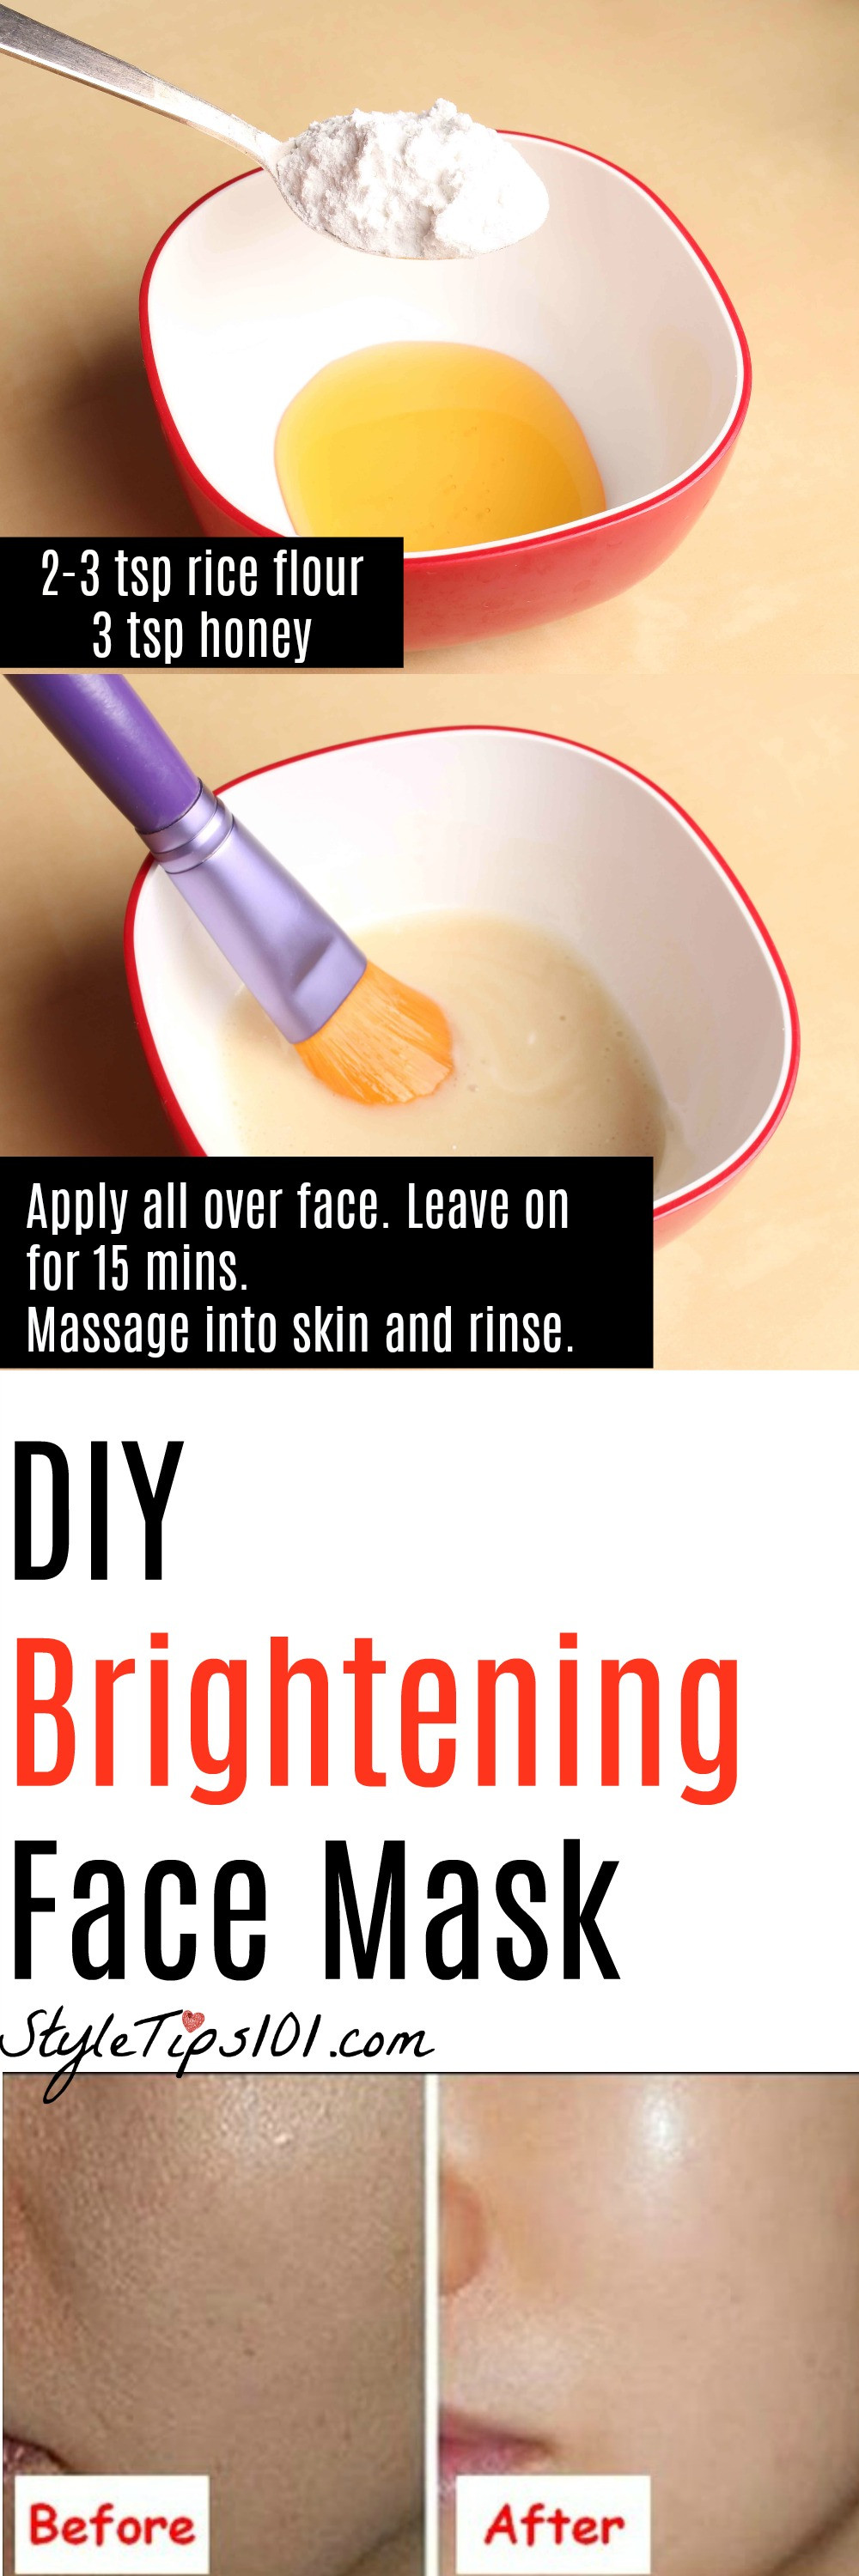 DIY Brightening Face Mask
 DIY Face Brightening Mask With Rice Flour and Honey